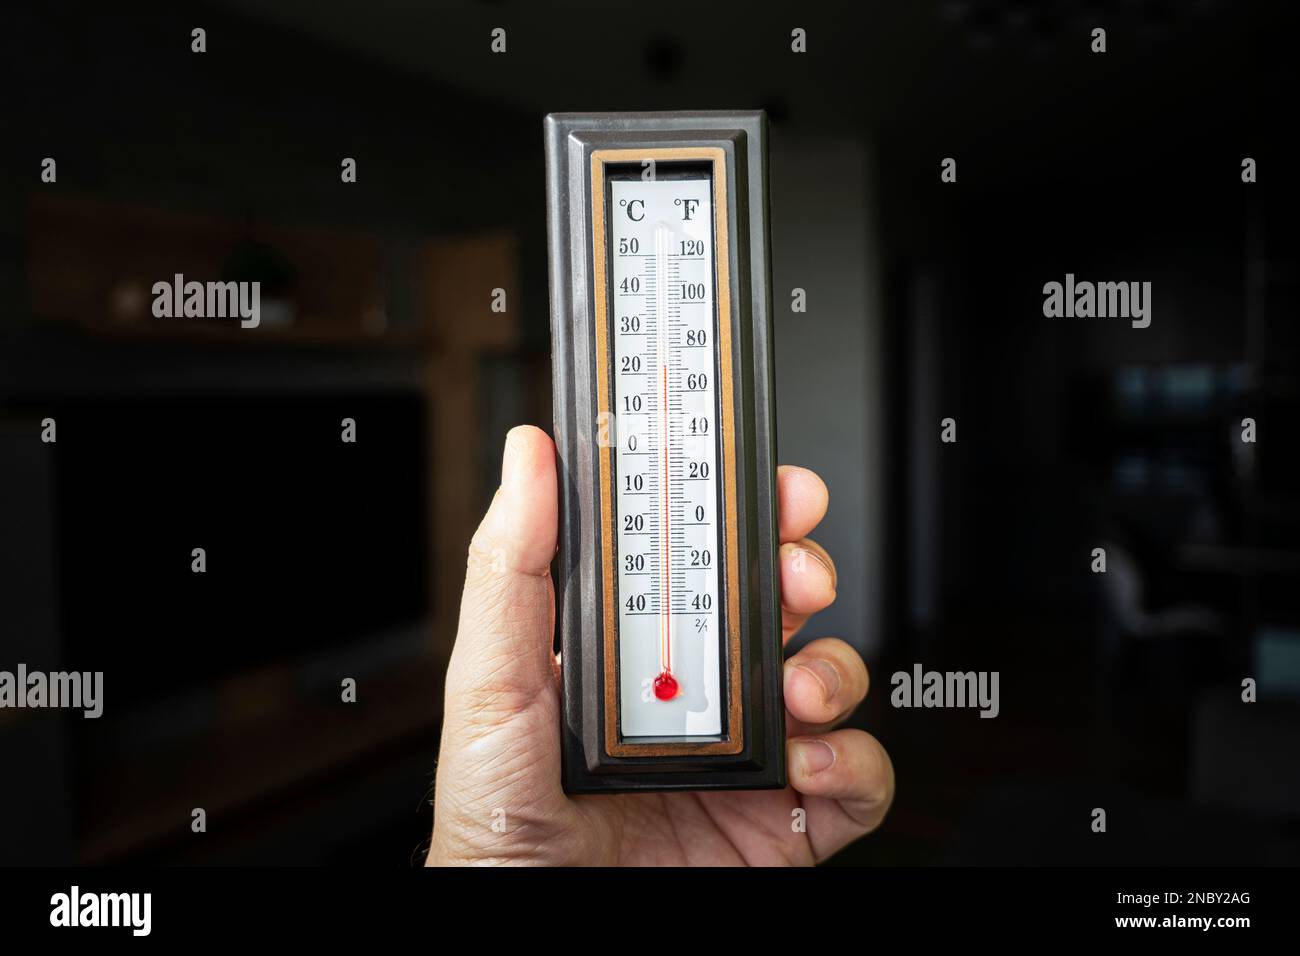 https://c8.alamy.com/comp/2NBY2AG/hand-with-a-plastic-mercury-thermometer-shows-the-temperature-in-the-room-powerful-heating-in-russia-22-degrees-celsius-is-the-norm-for-the-temperat-2NBY2AG.jpg